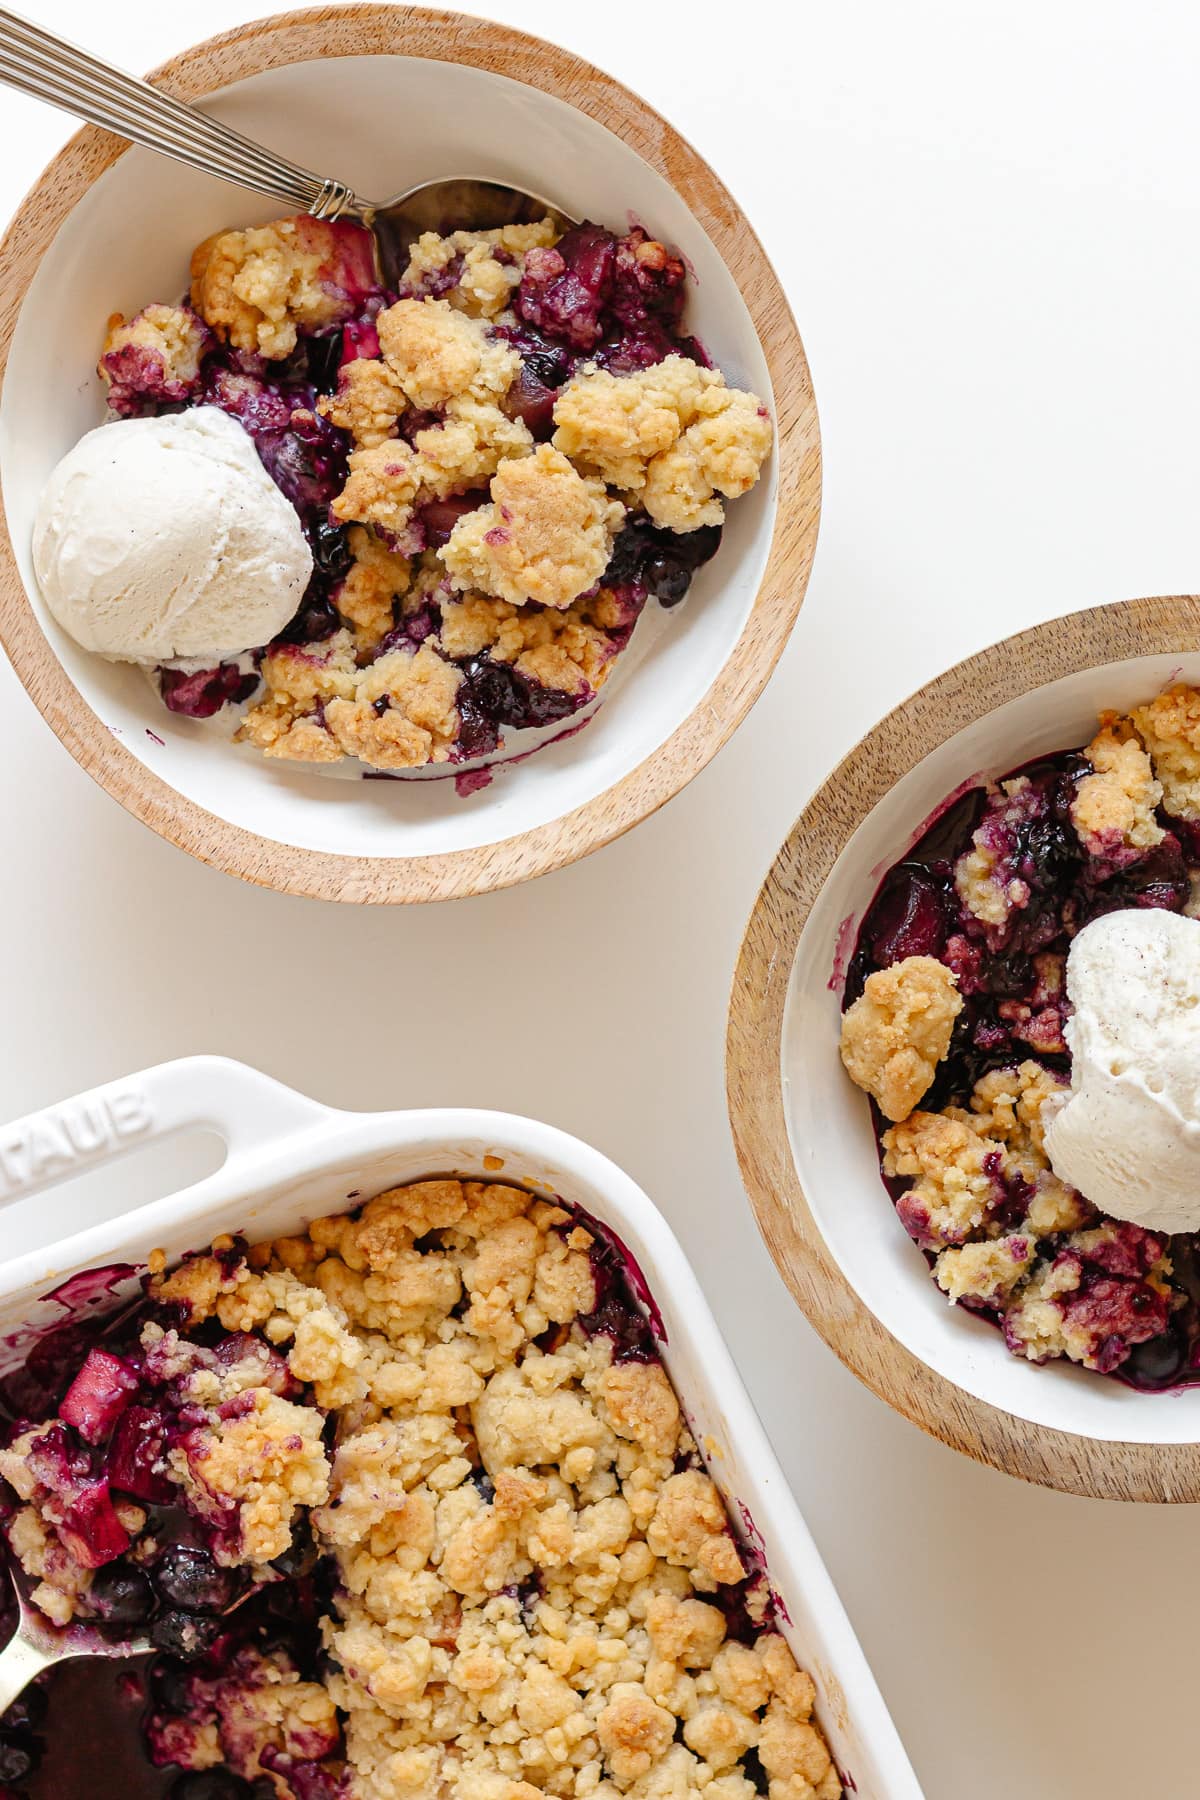 Two bowls of blueberry apple crumble topped with vanilla ice cream next to the baking dish.